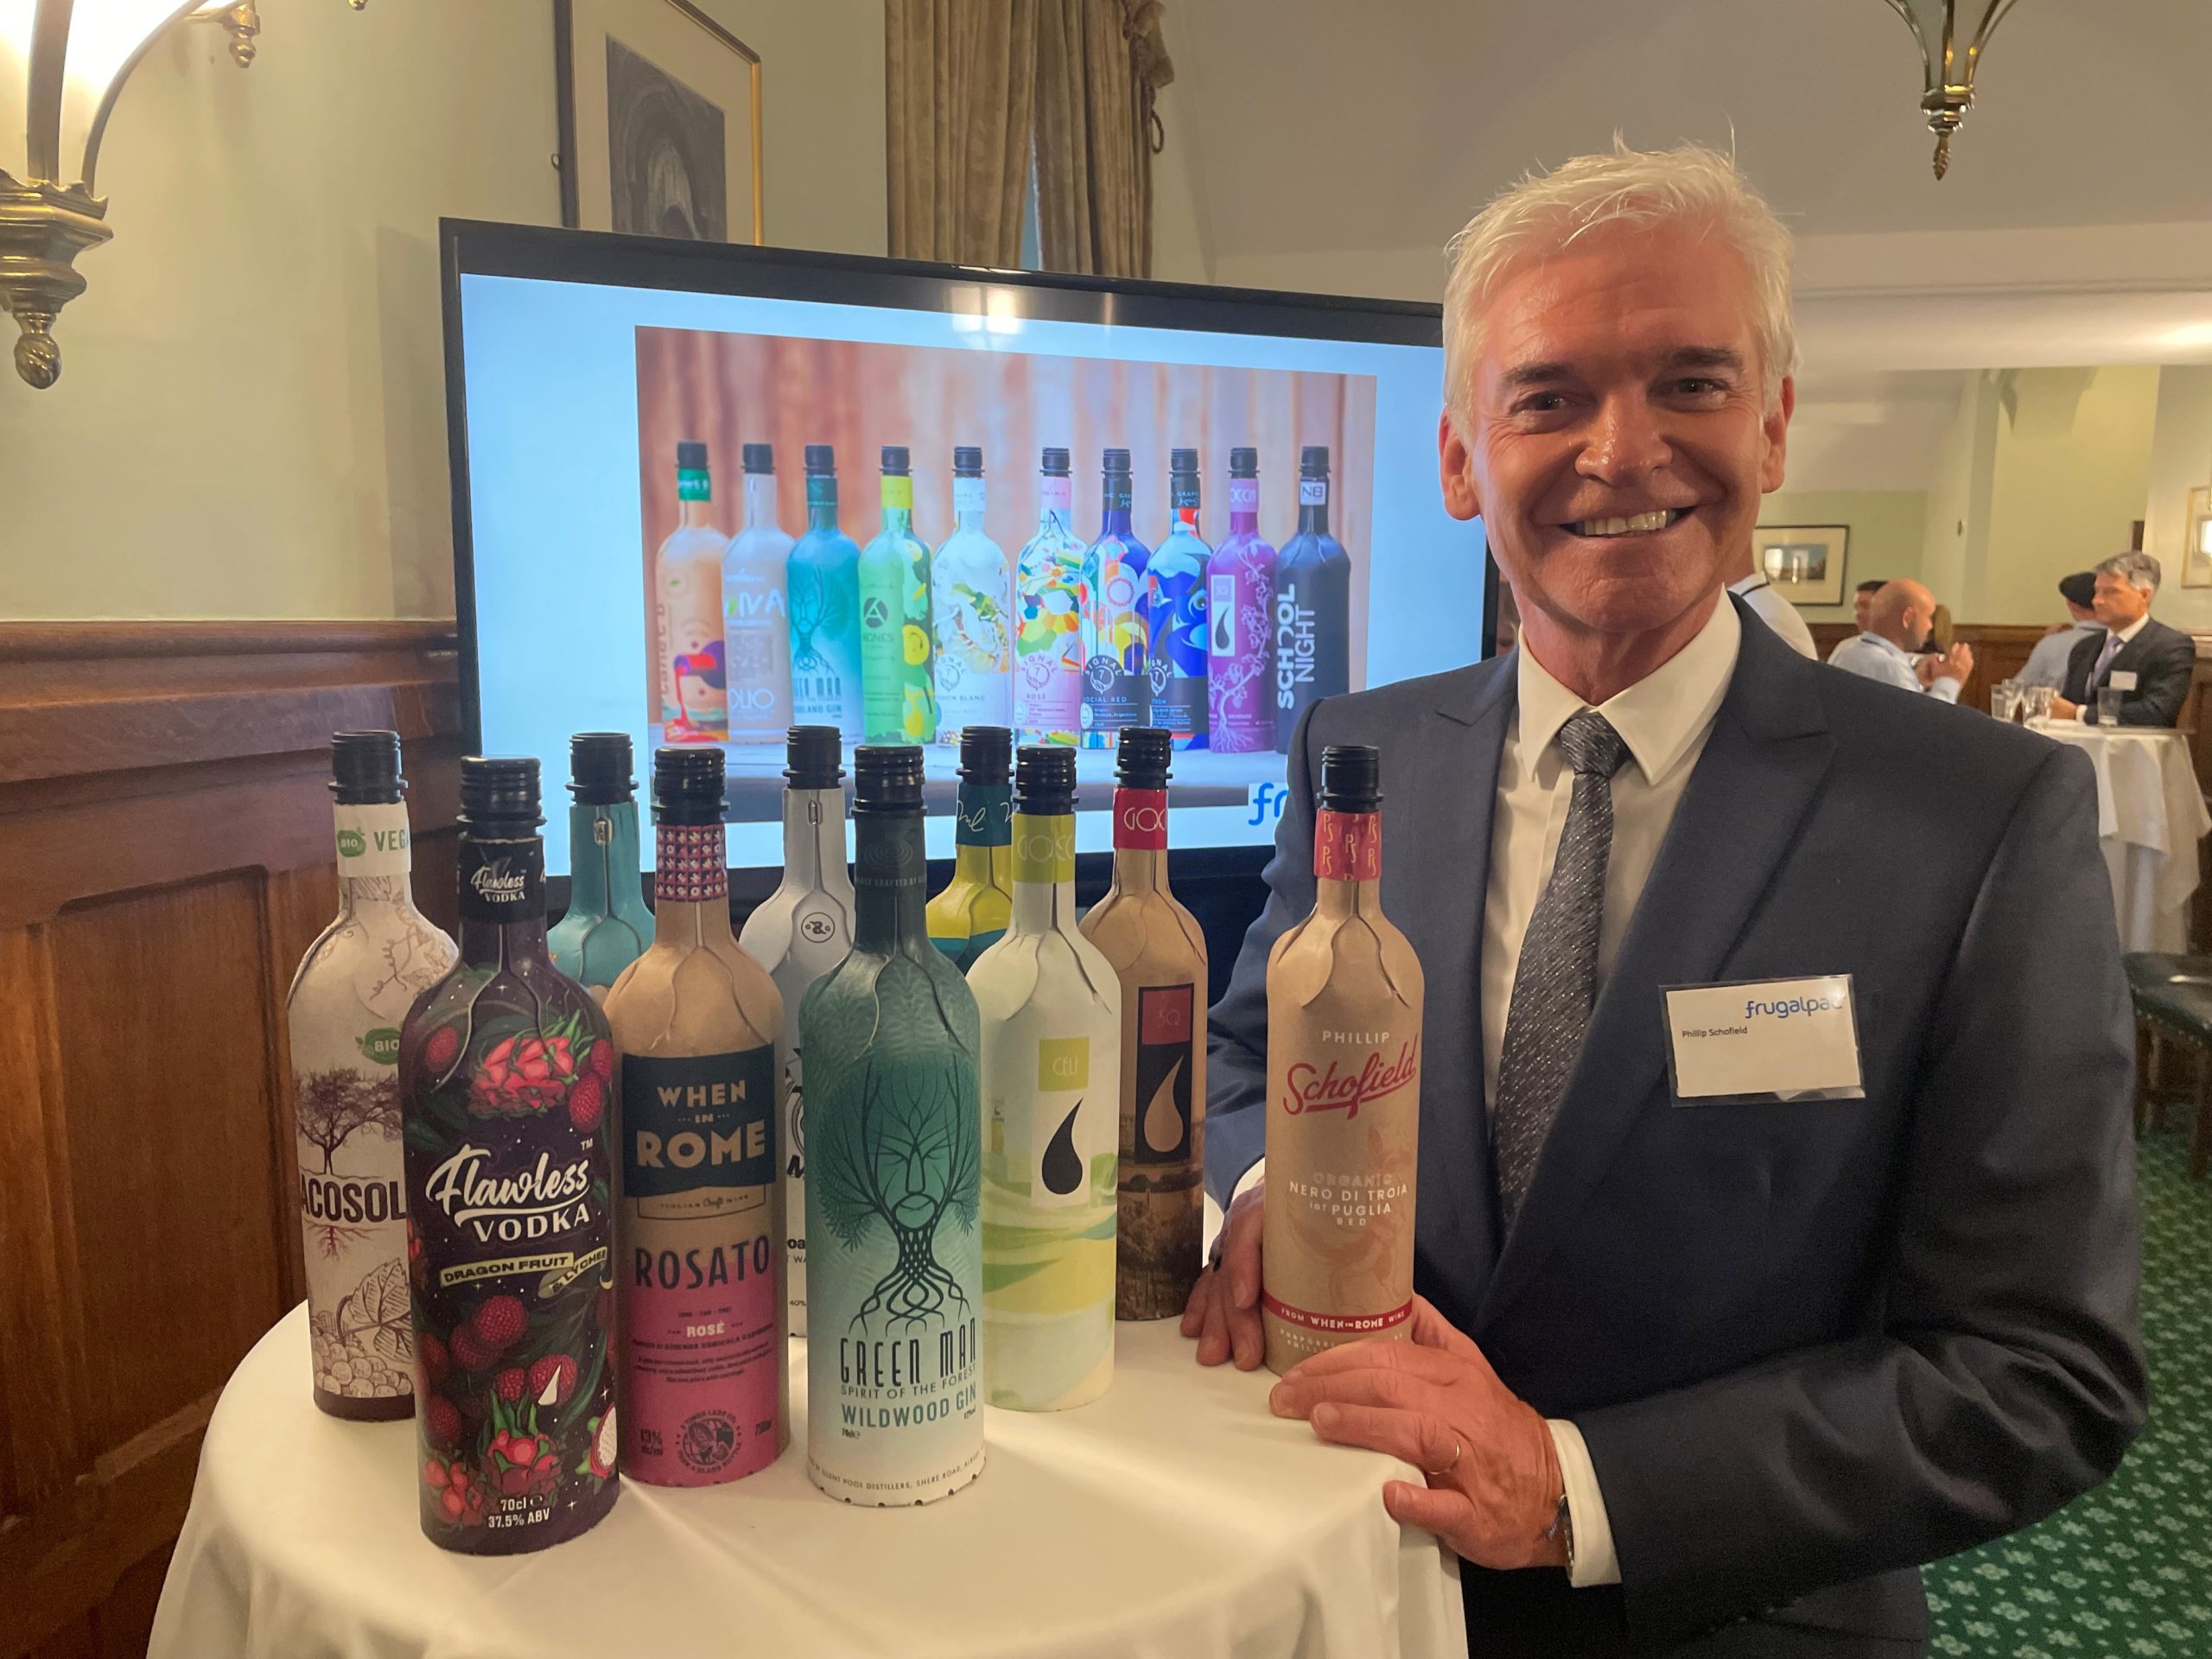 Phillip Schofield leads paper bottle revolution in Parliament to mark second anniversary of the Frugal Bottle